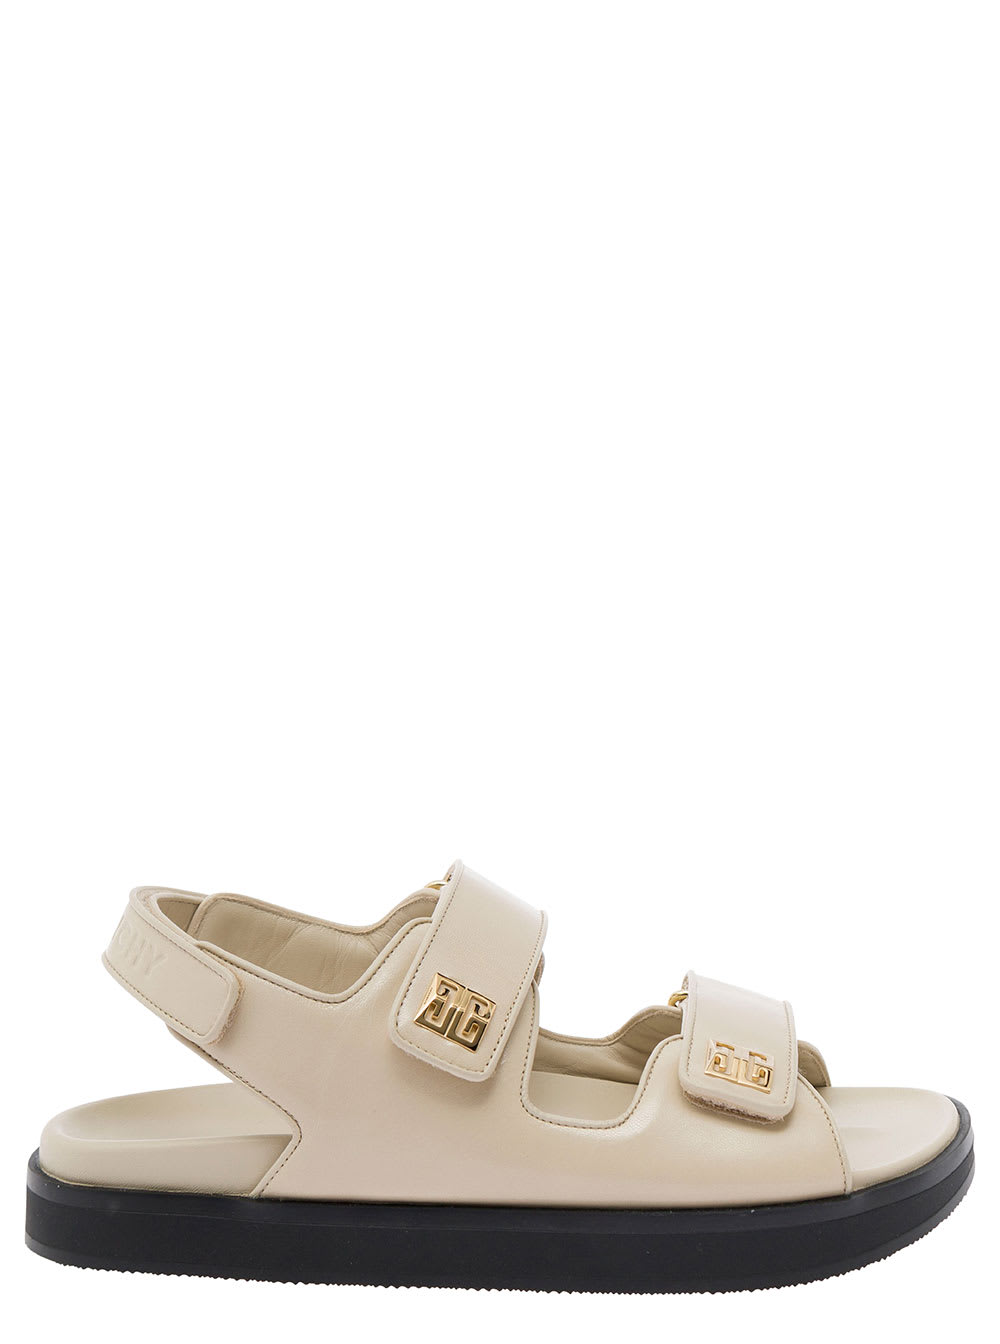 GIVENCHY BEIGE FLAT SANDALS WITH STRAPS AND 4G DETAIL IN PADDED LEATHER WOMAN